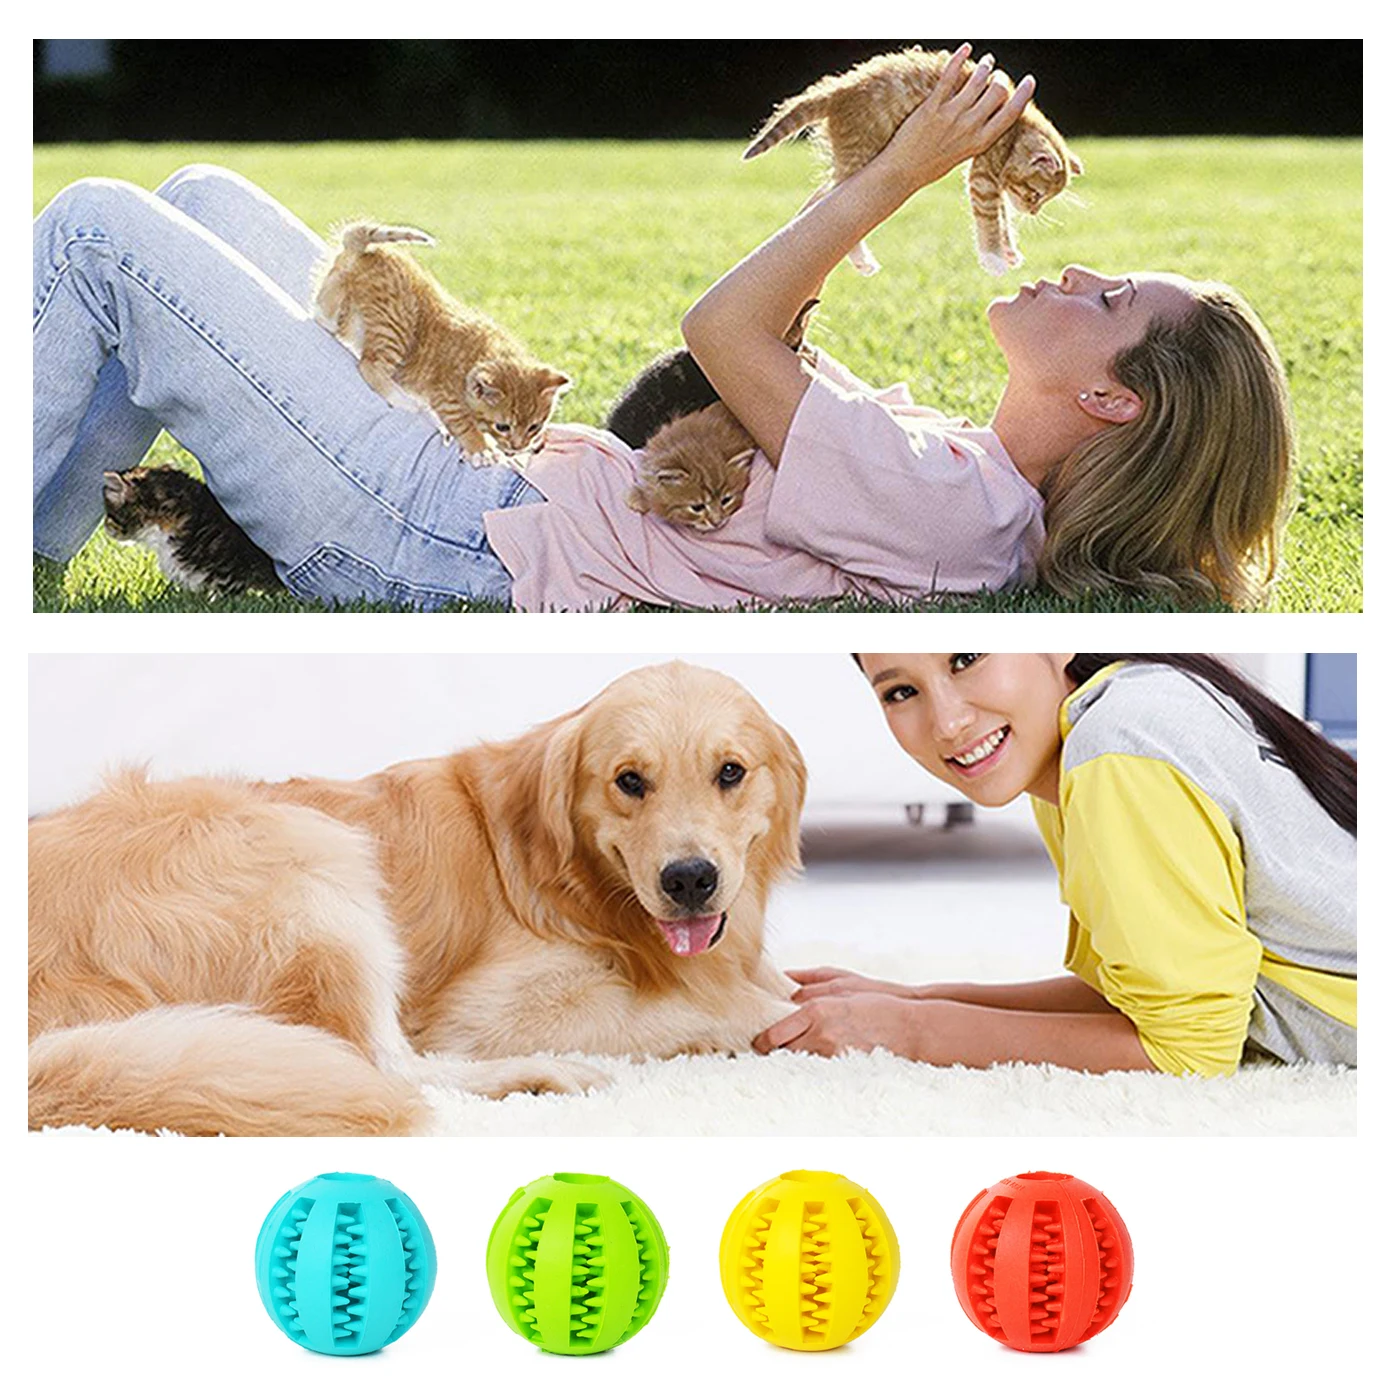 

Dog Toy Chew Bite Toy BalI Pet Interactive Rubber Balls Cat Puppy Teeth Chew Toys Healthy Tooth Cleaning Pet Games Teething Toy